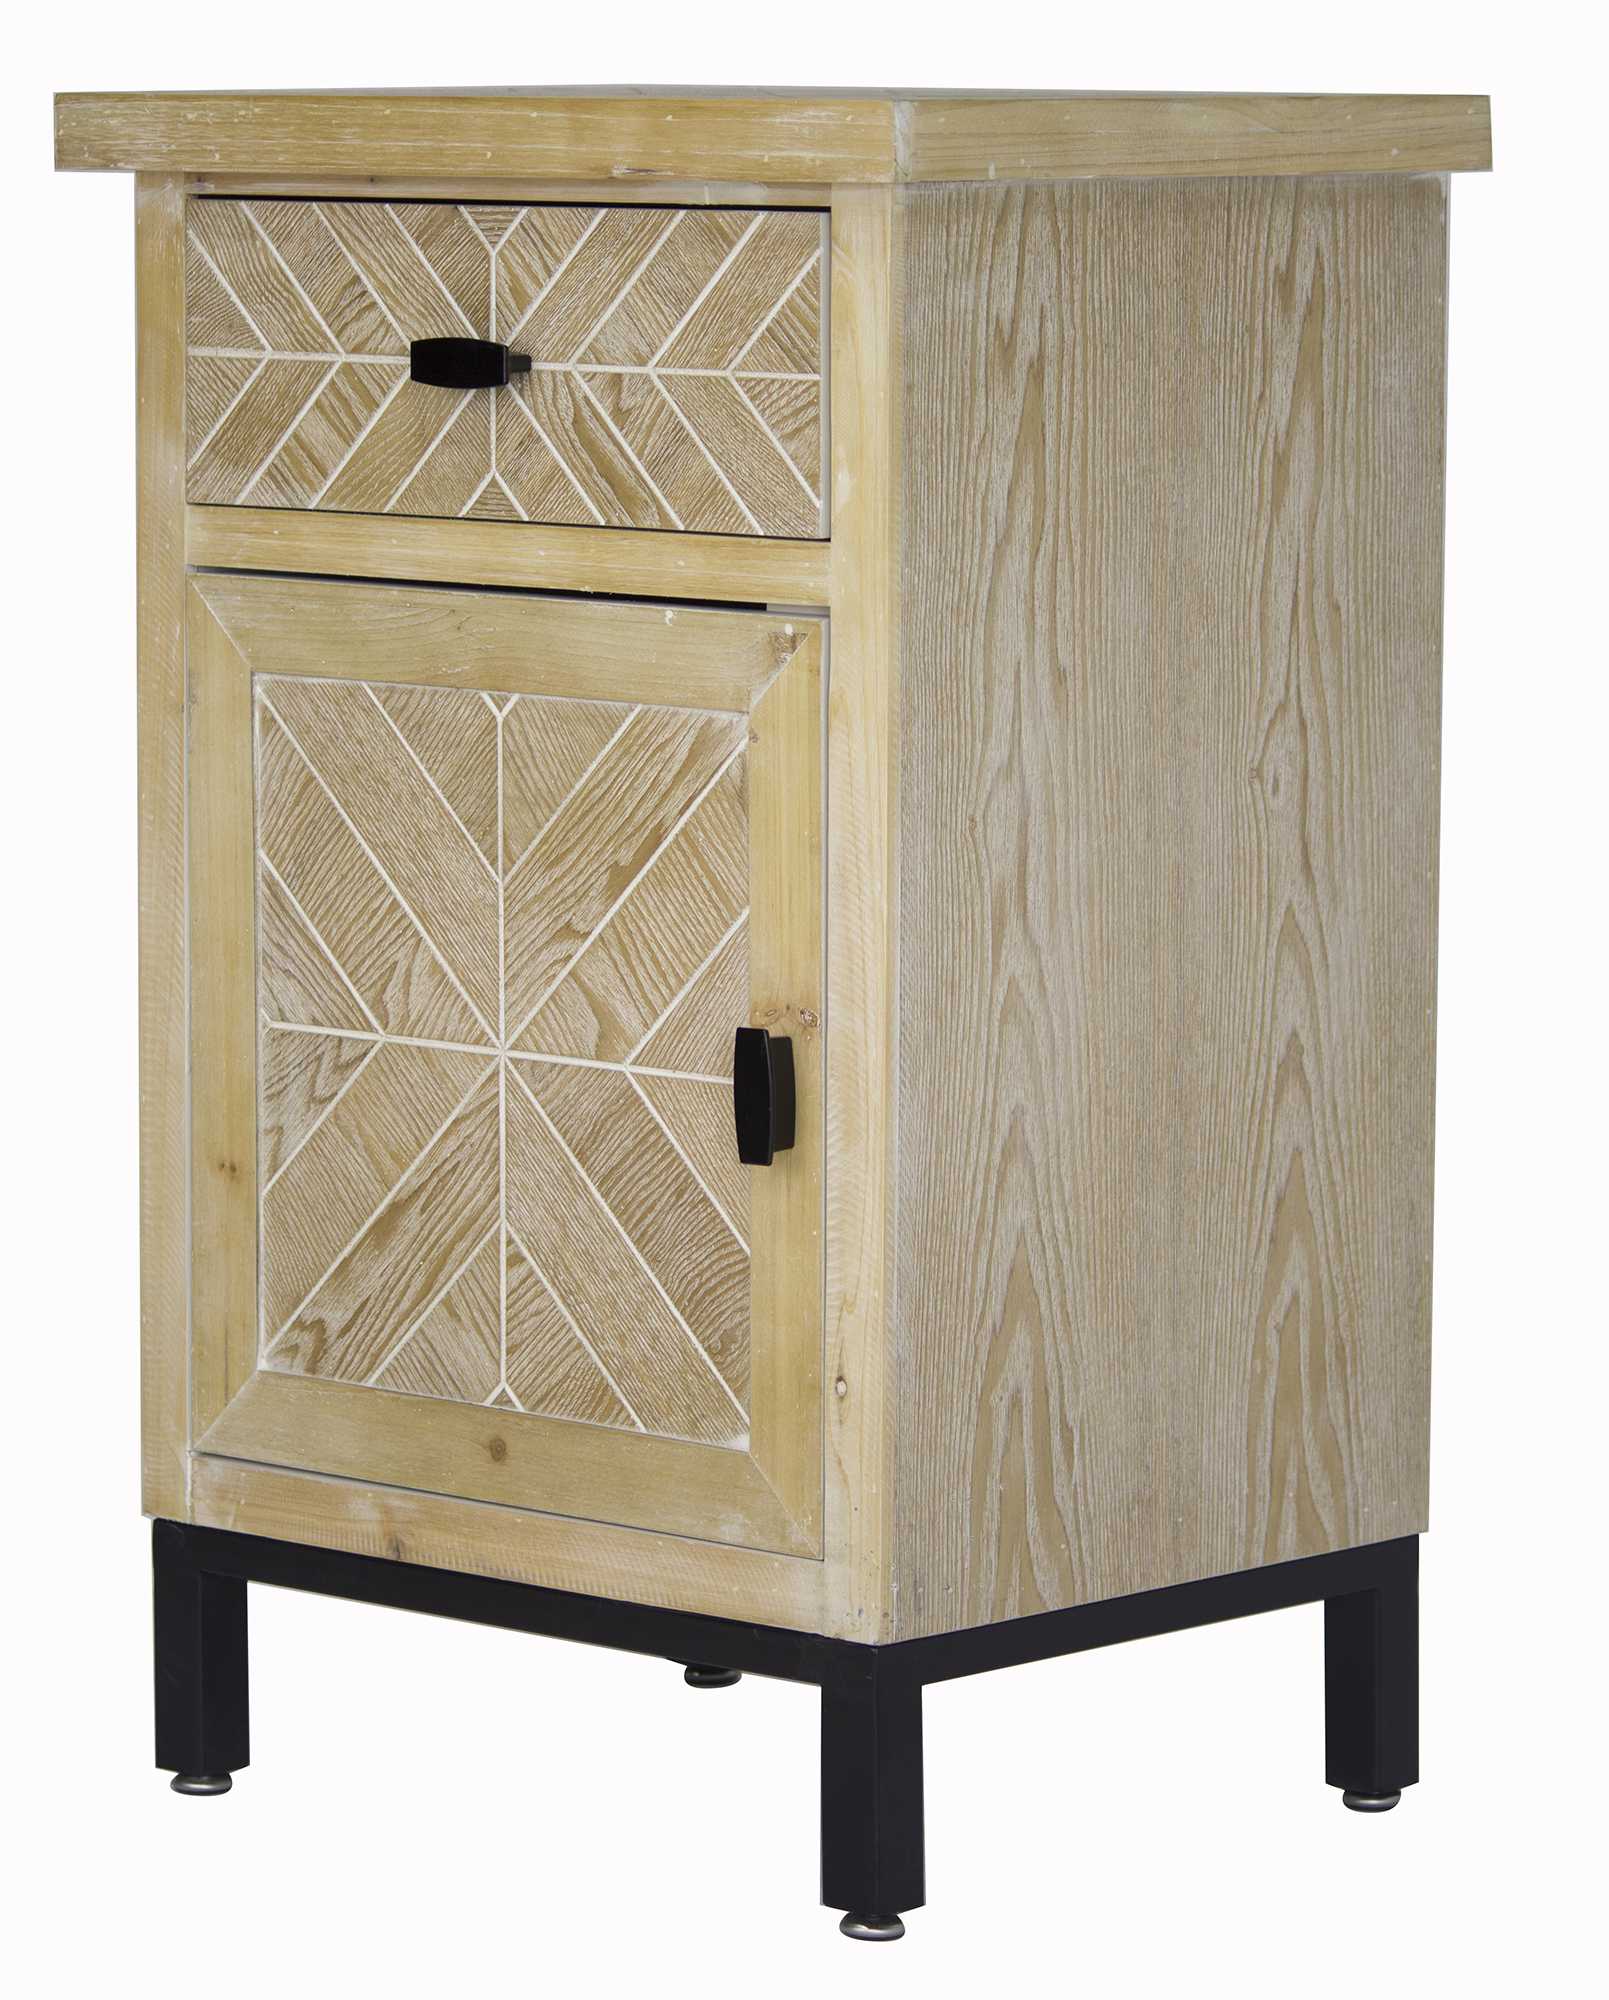 18.9" X 15" X 28.7" White Washed Parquet Iron Wood MDF Accent Cabinet with aDrawer and Door